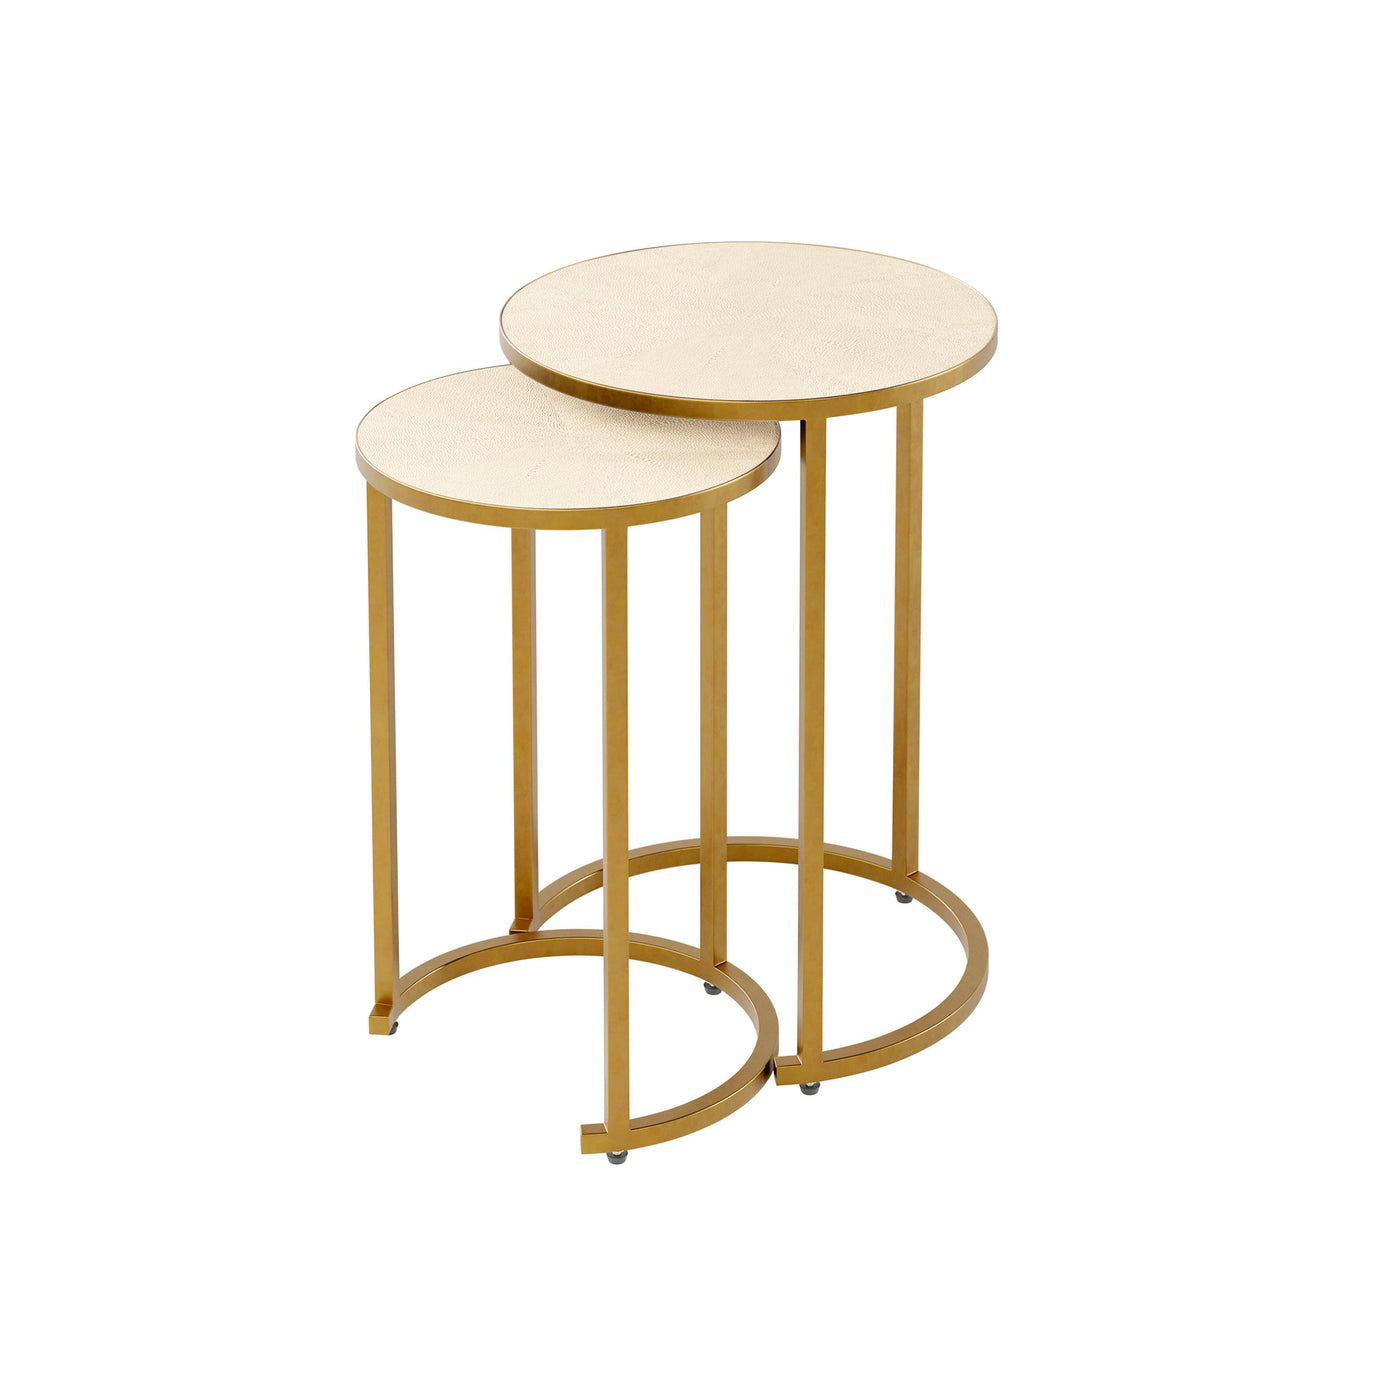 Hampton Nest Table | Ivory Shagreen | 2 piece By D.I. Designs